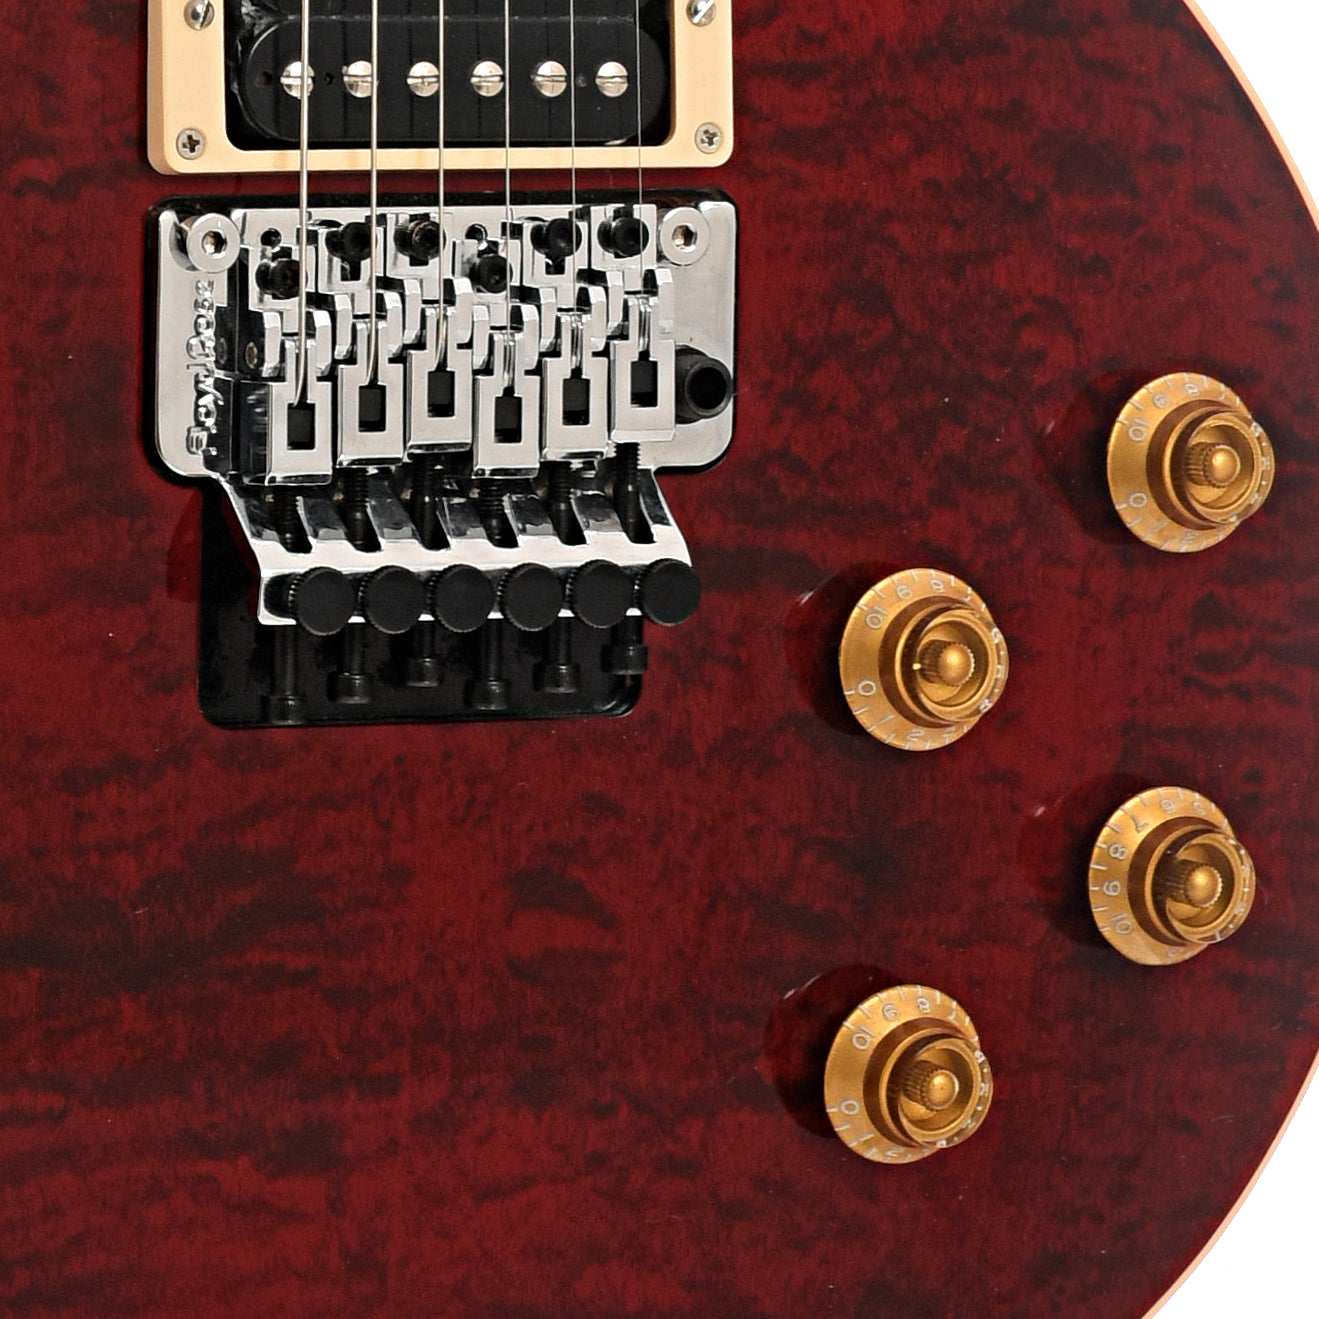 Floyd Rose Tremolo and controls of Gibson Les Paul Axcess Electric Guitar